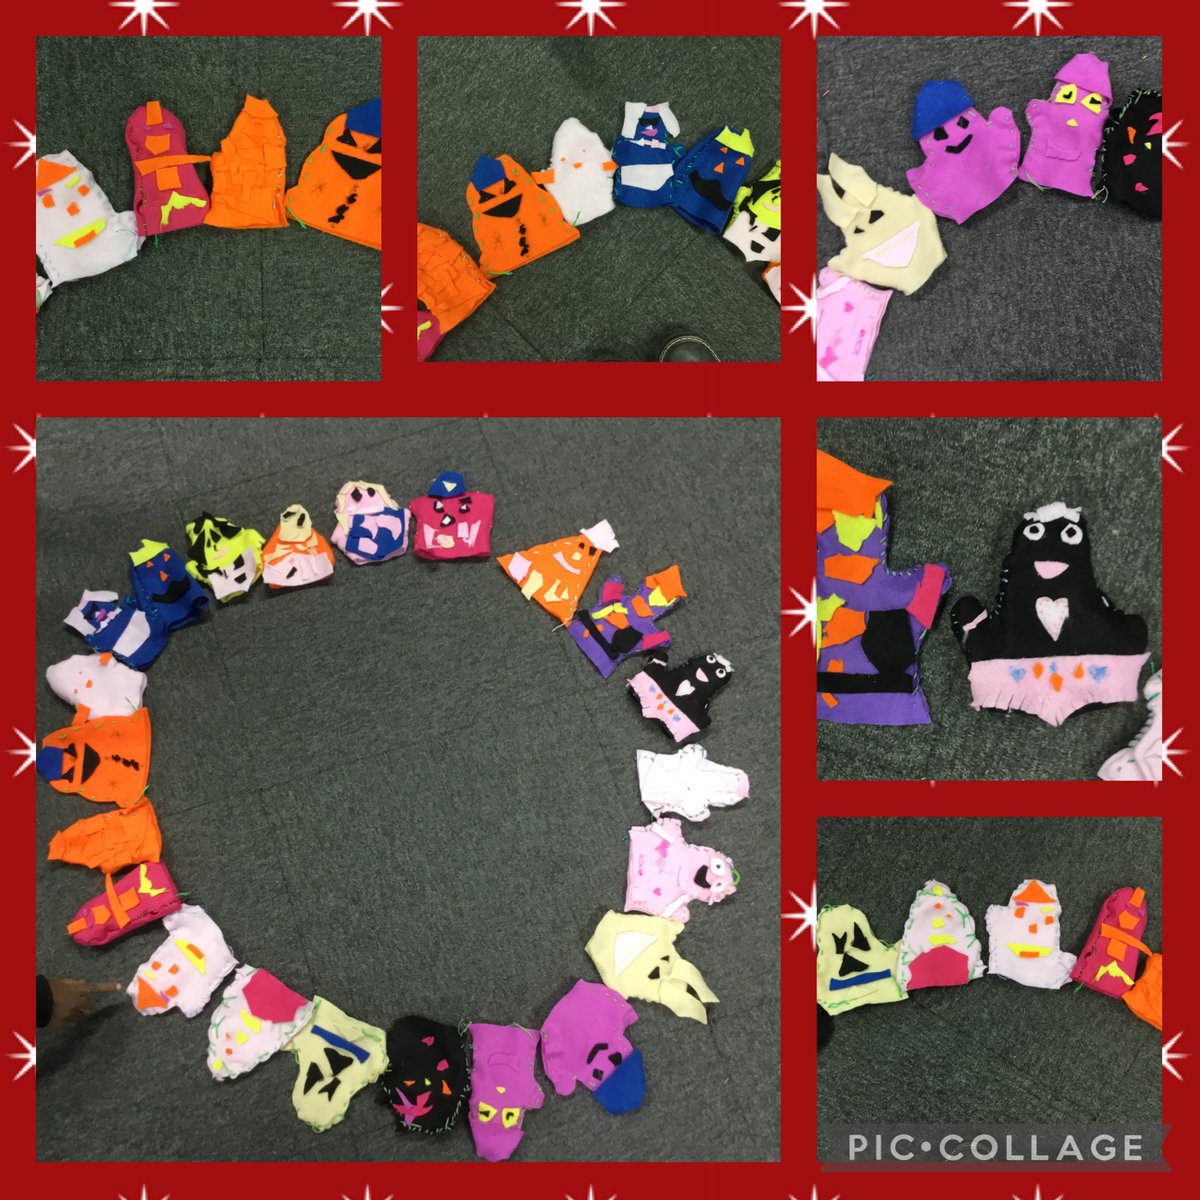 Look at the incredible glove puppets class2M have made. We have explored joining techniques and have learnt how to sew pieces of material together. We love all our different design ideas! #KS1DT #DT@sacredheart